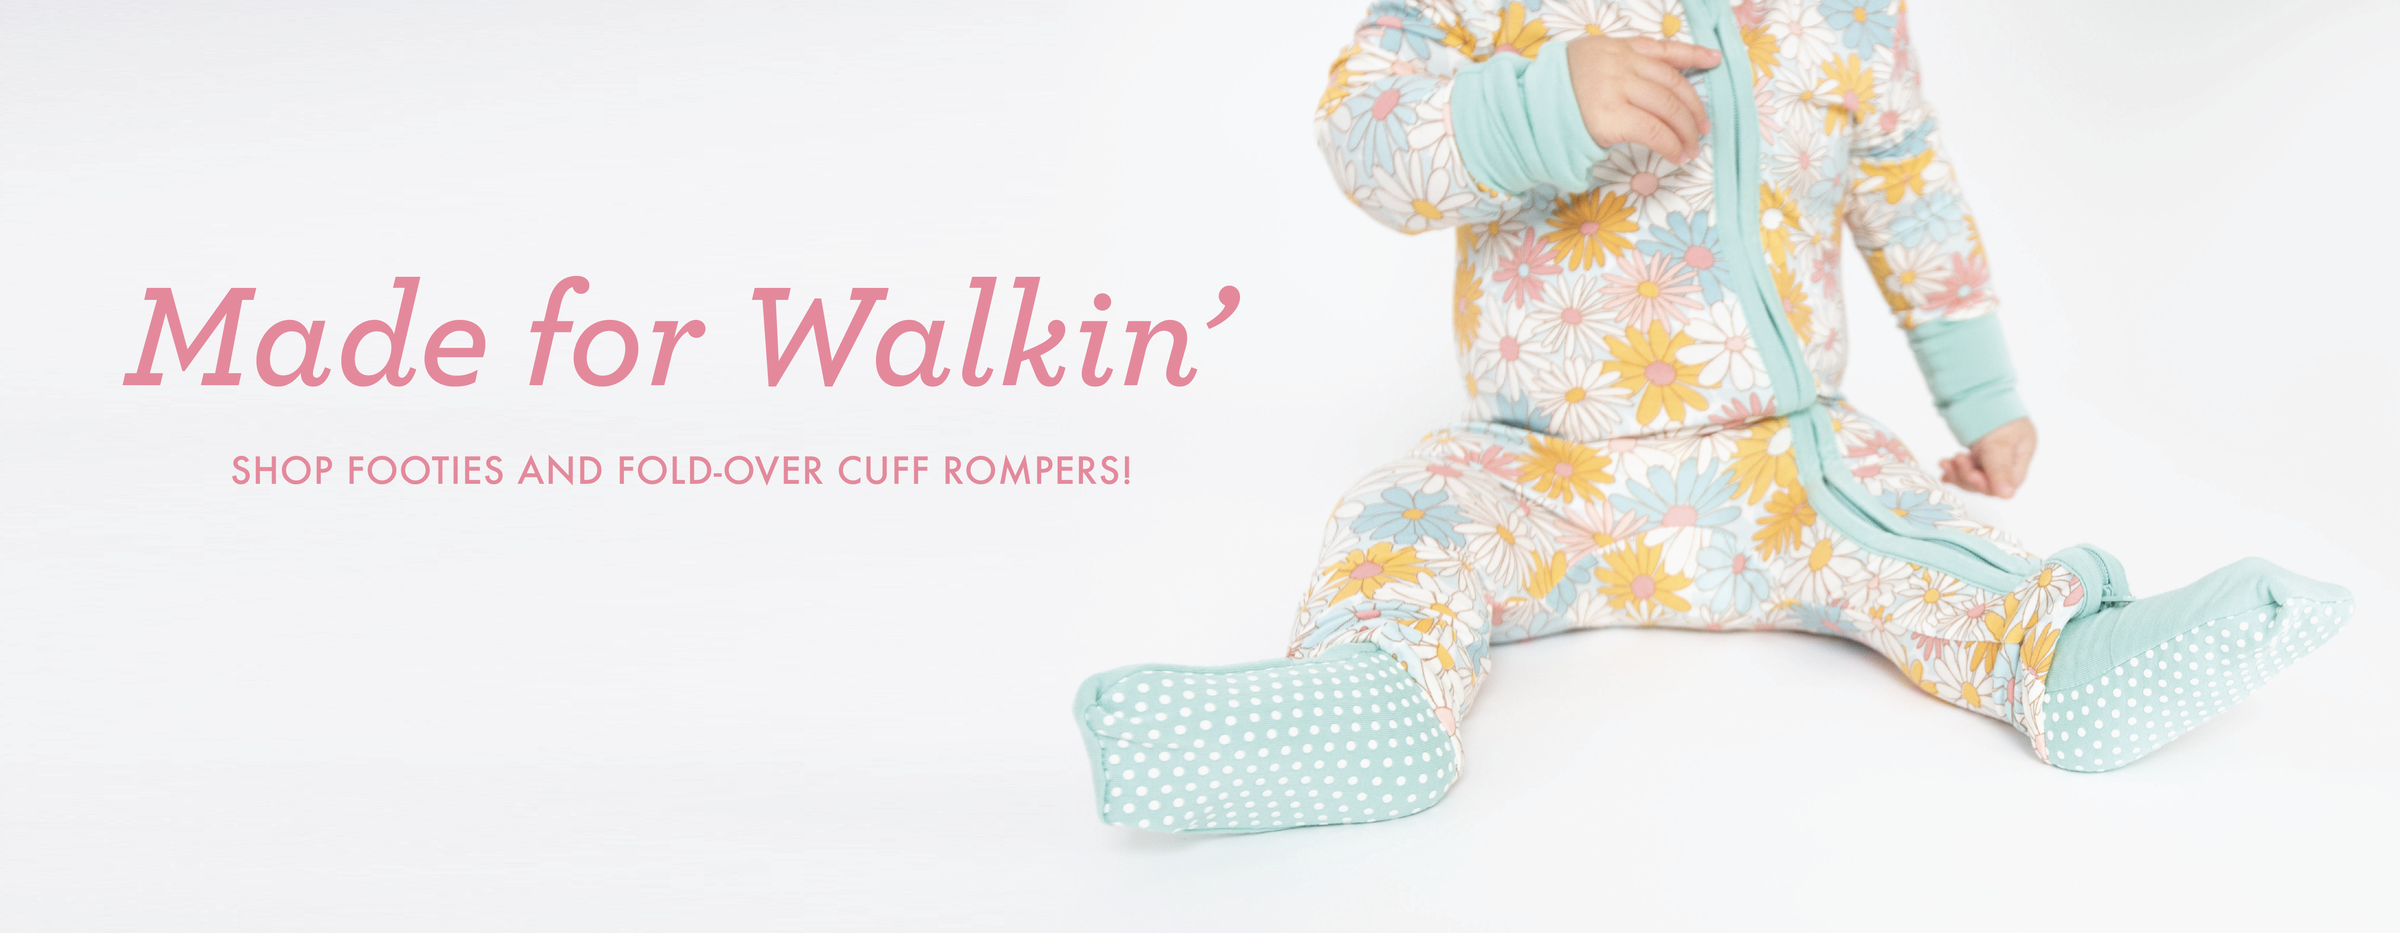 Shop Footies and Fold-Over cuff rompers carousel